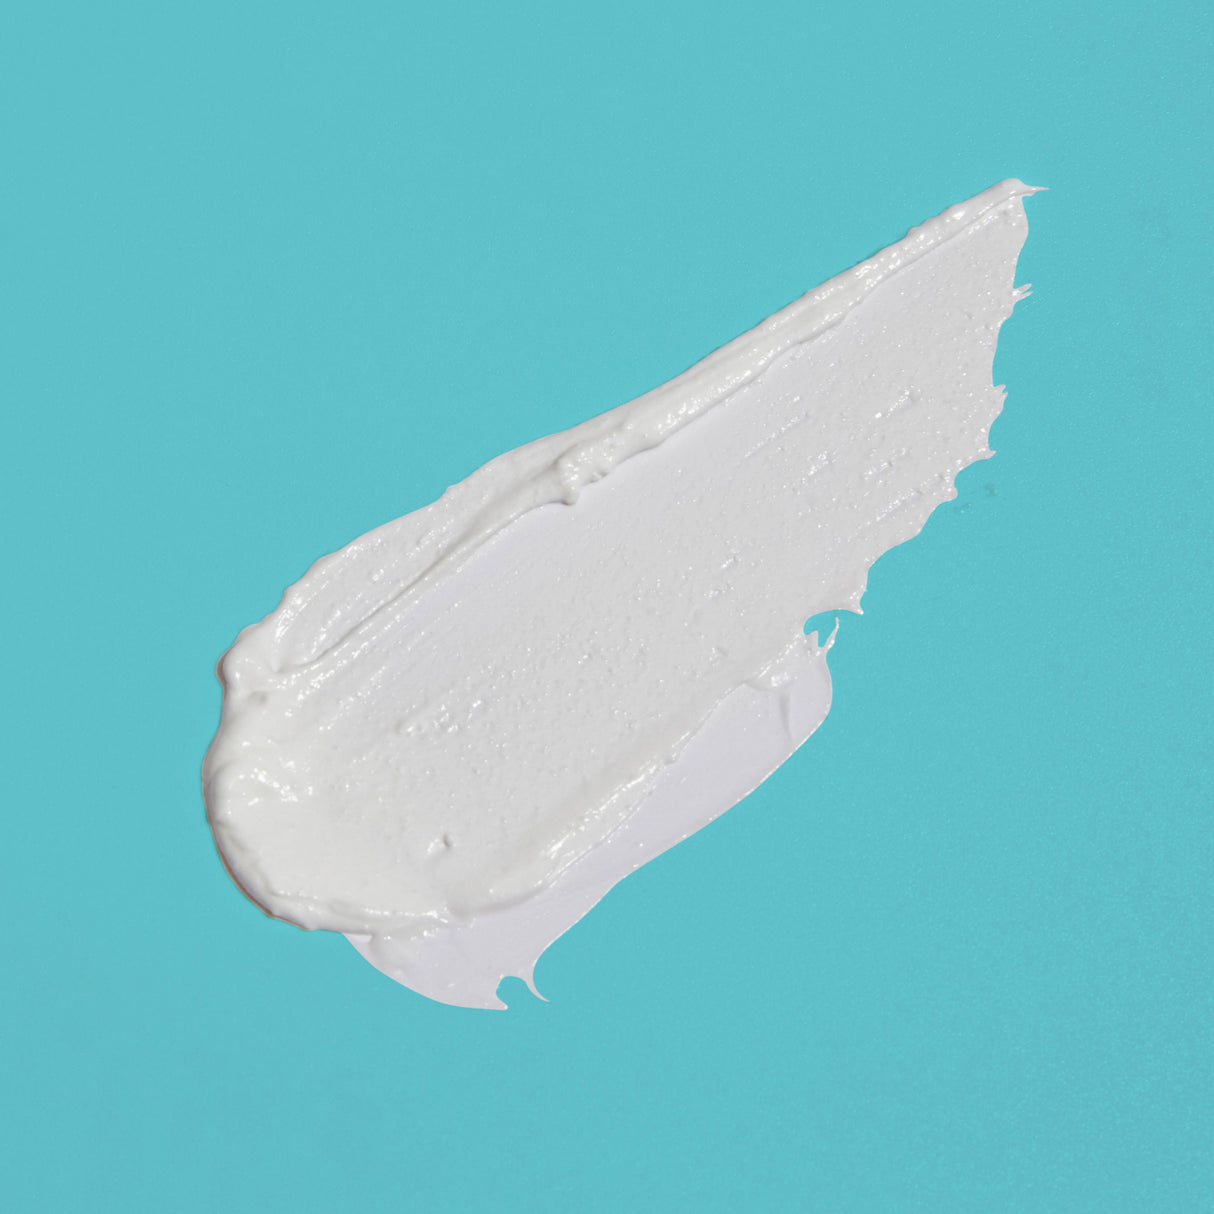 A smear of white barrier cream